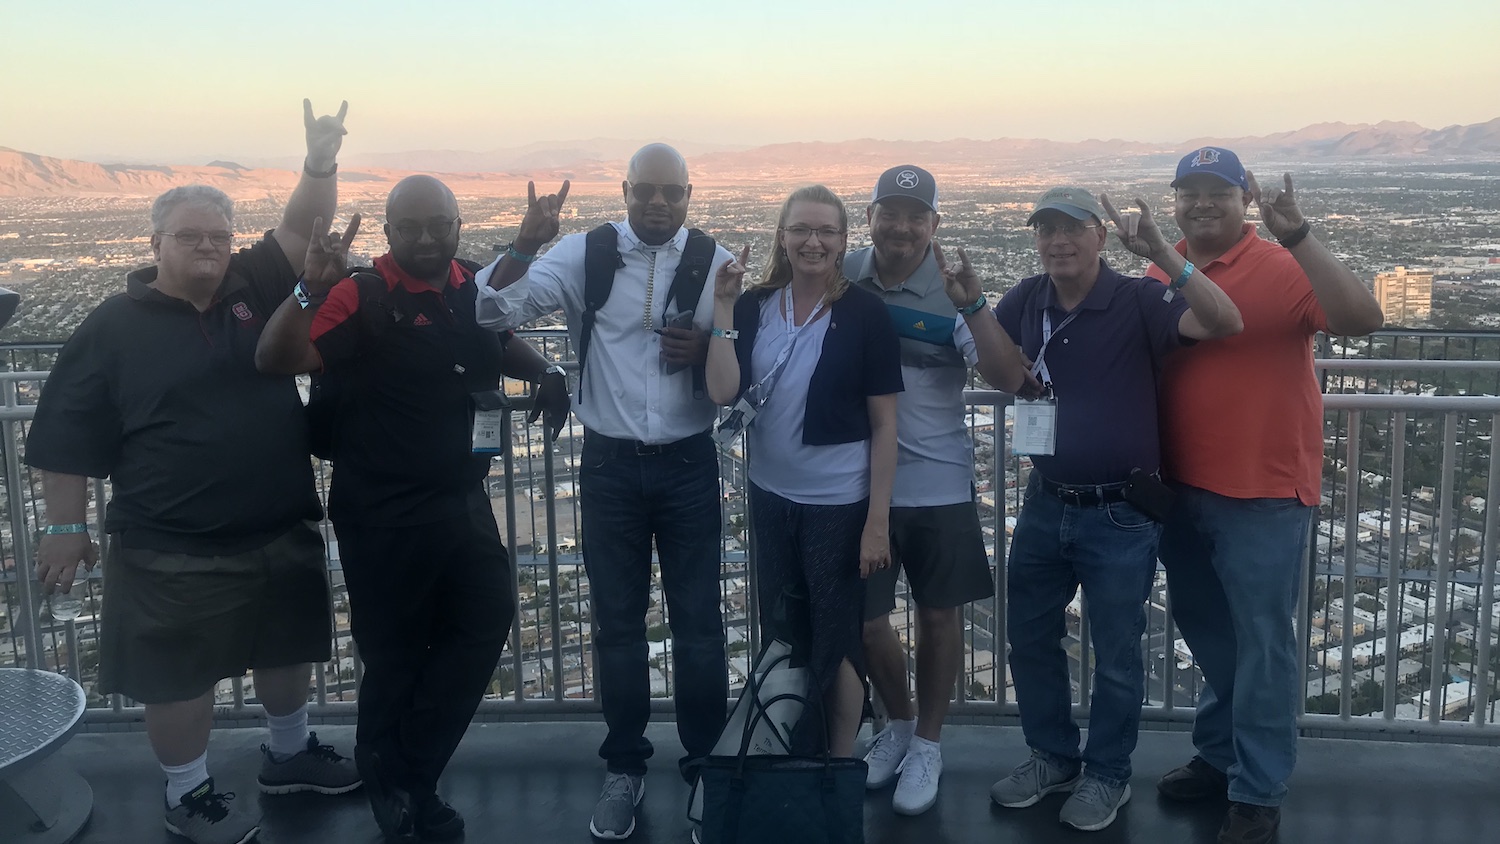 Left to right: Darren Ley, Tony Pearson, Shawn Colvin, Donna Petherbridge, Tim Hinds, Bob Klein and Brandon Pope in Las Vegas for the UBTech conference and InfoComm trade show. The group is standing on a balcony in front of the skyline.